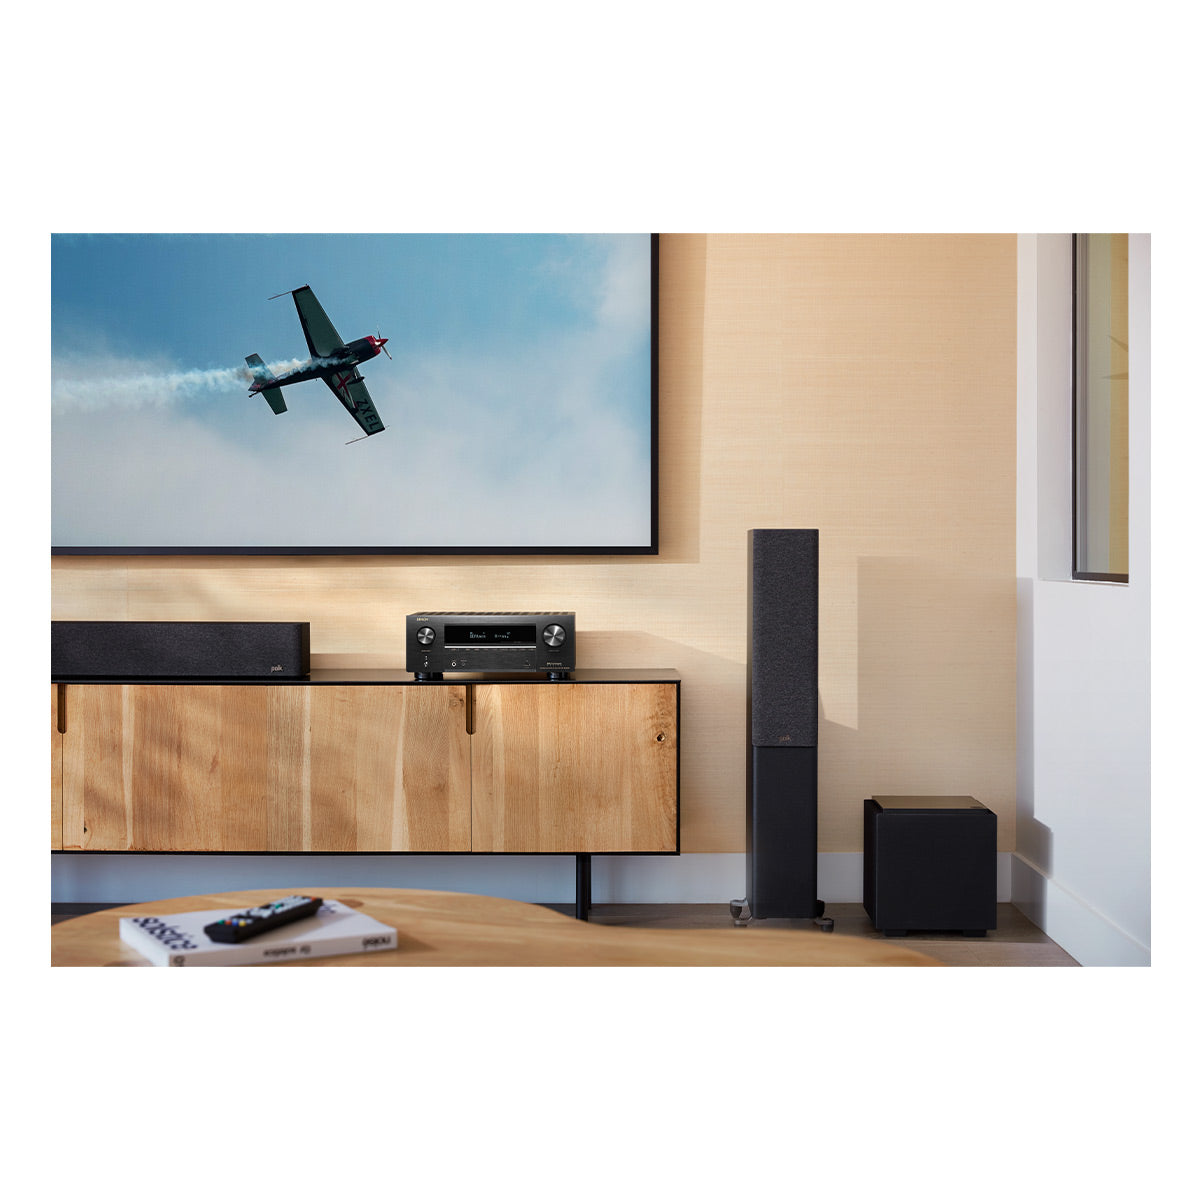 Denon AVR-X2800H 7.2 Channel 8K Home Theater Receiver with Dolby Atmos/DTS:X and HEOS Built-In